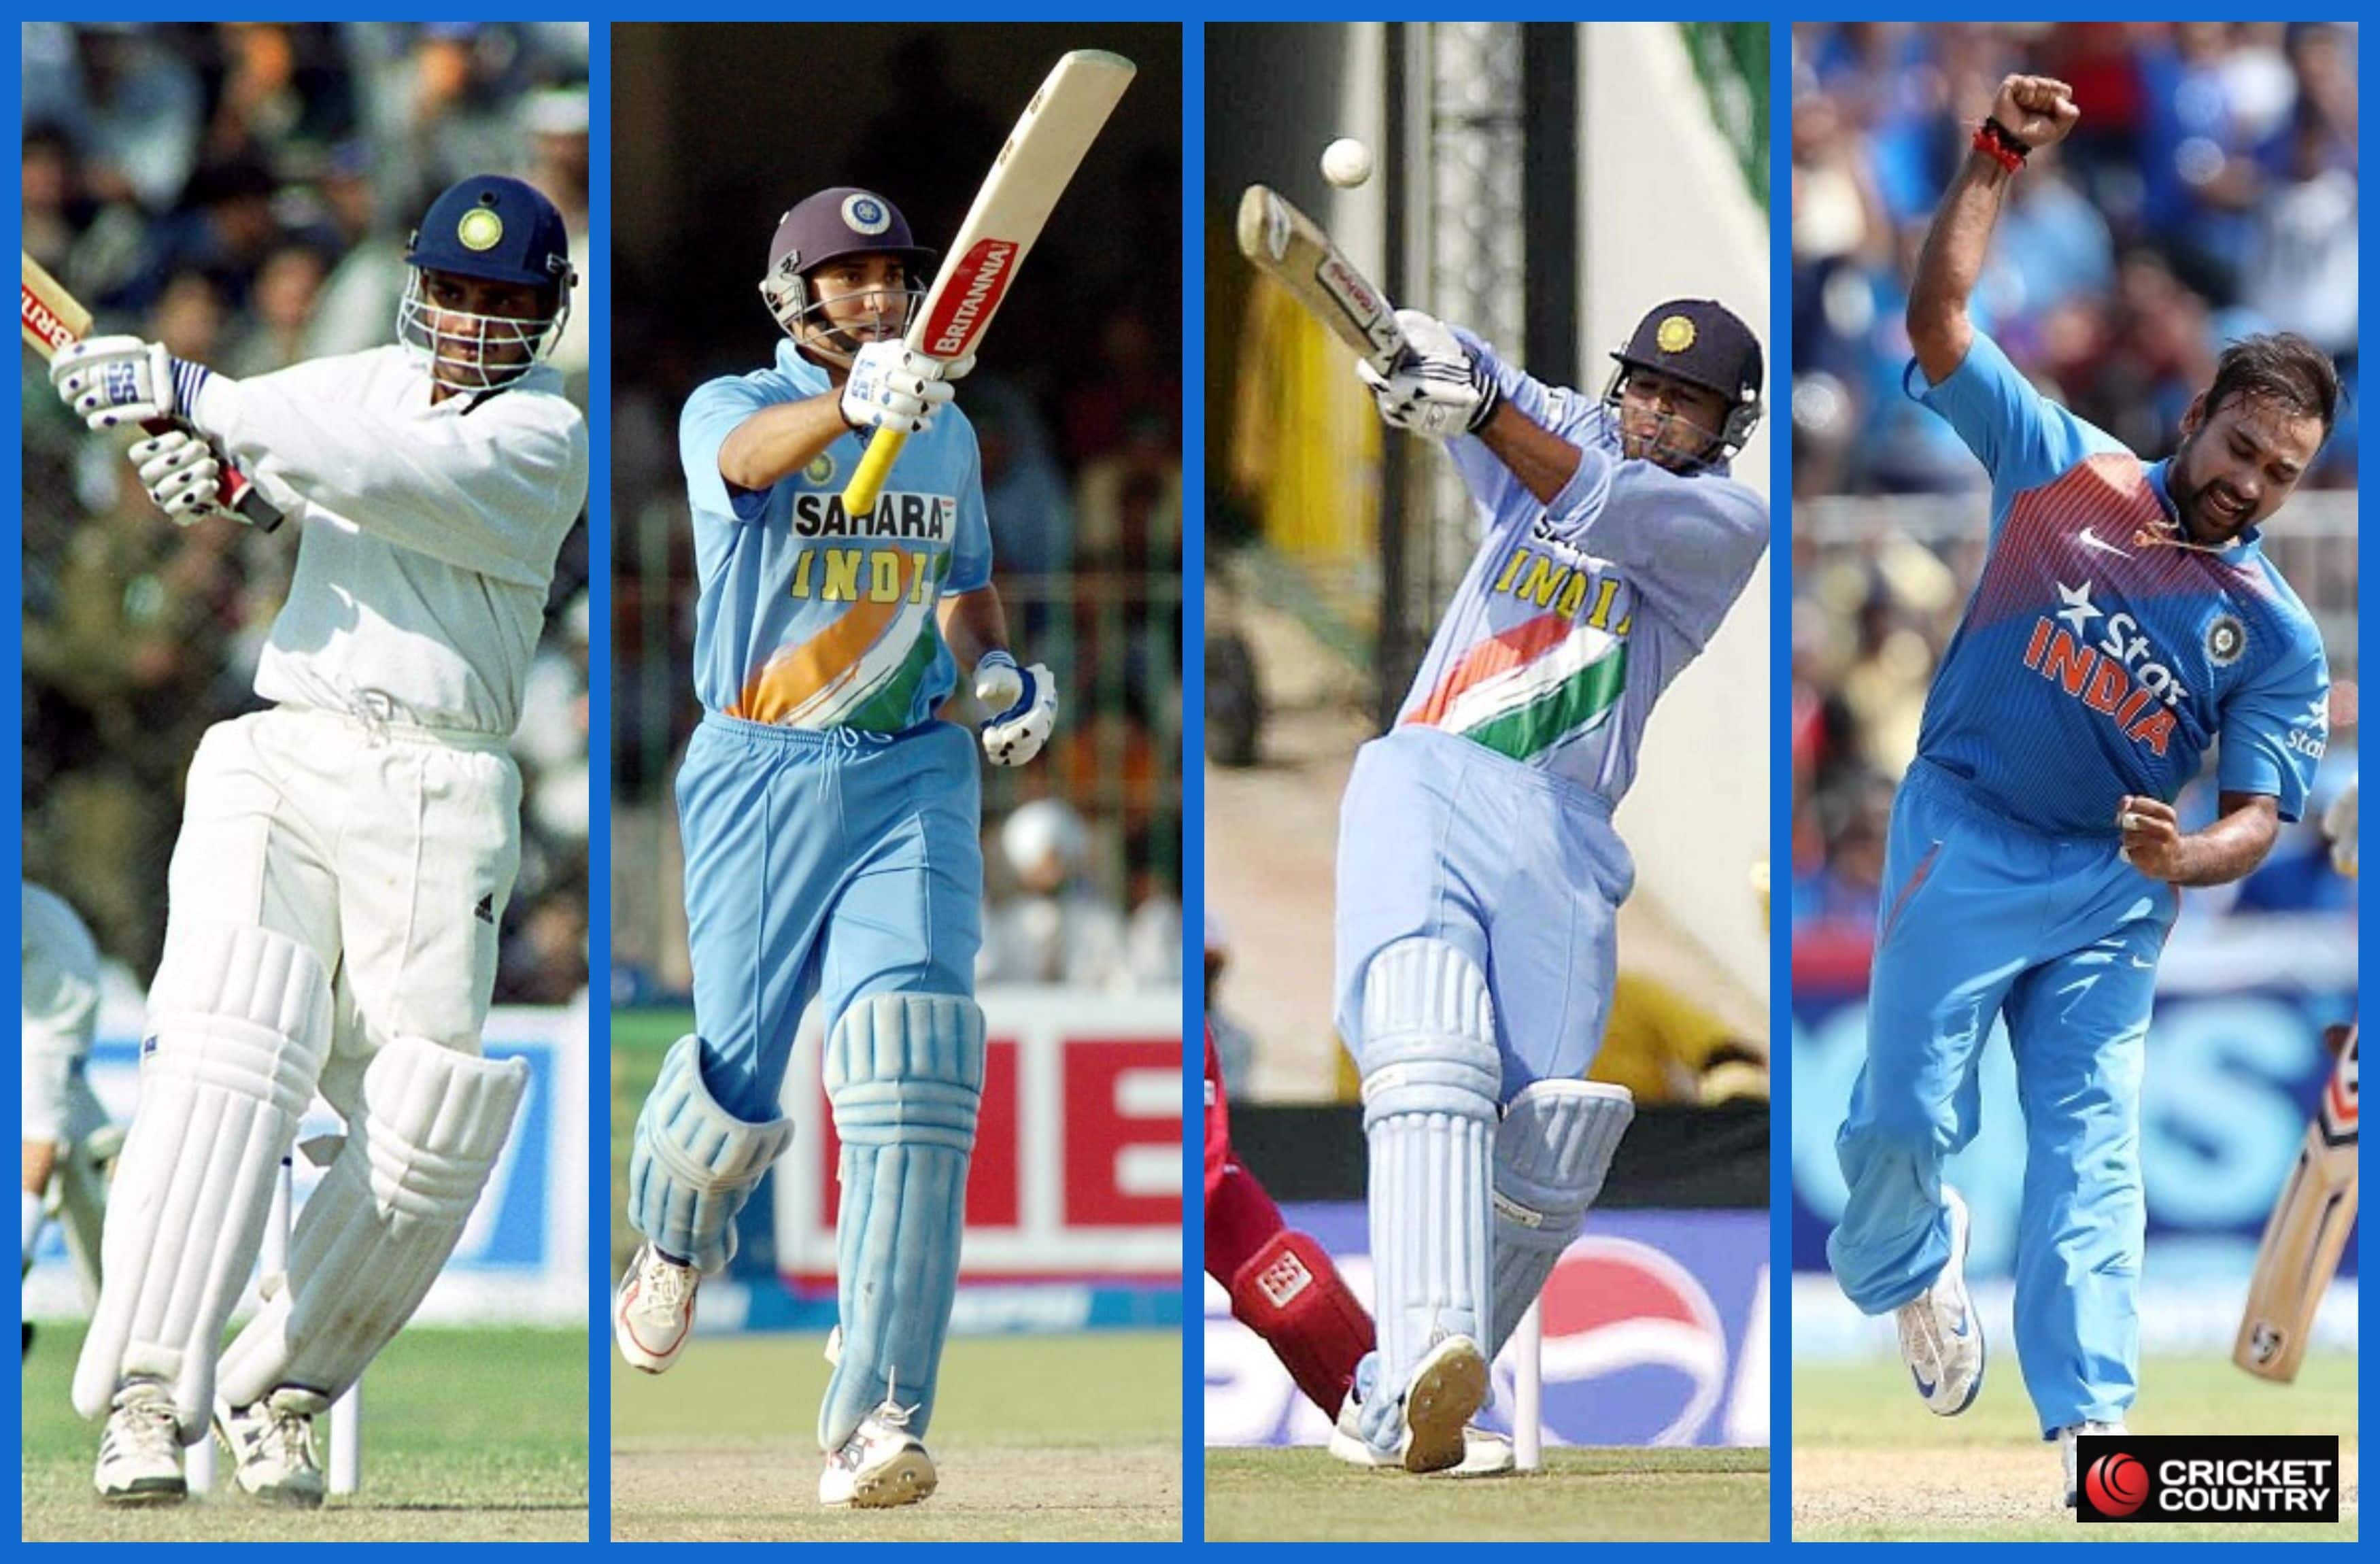 How many times have India won ODI series deciders?